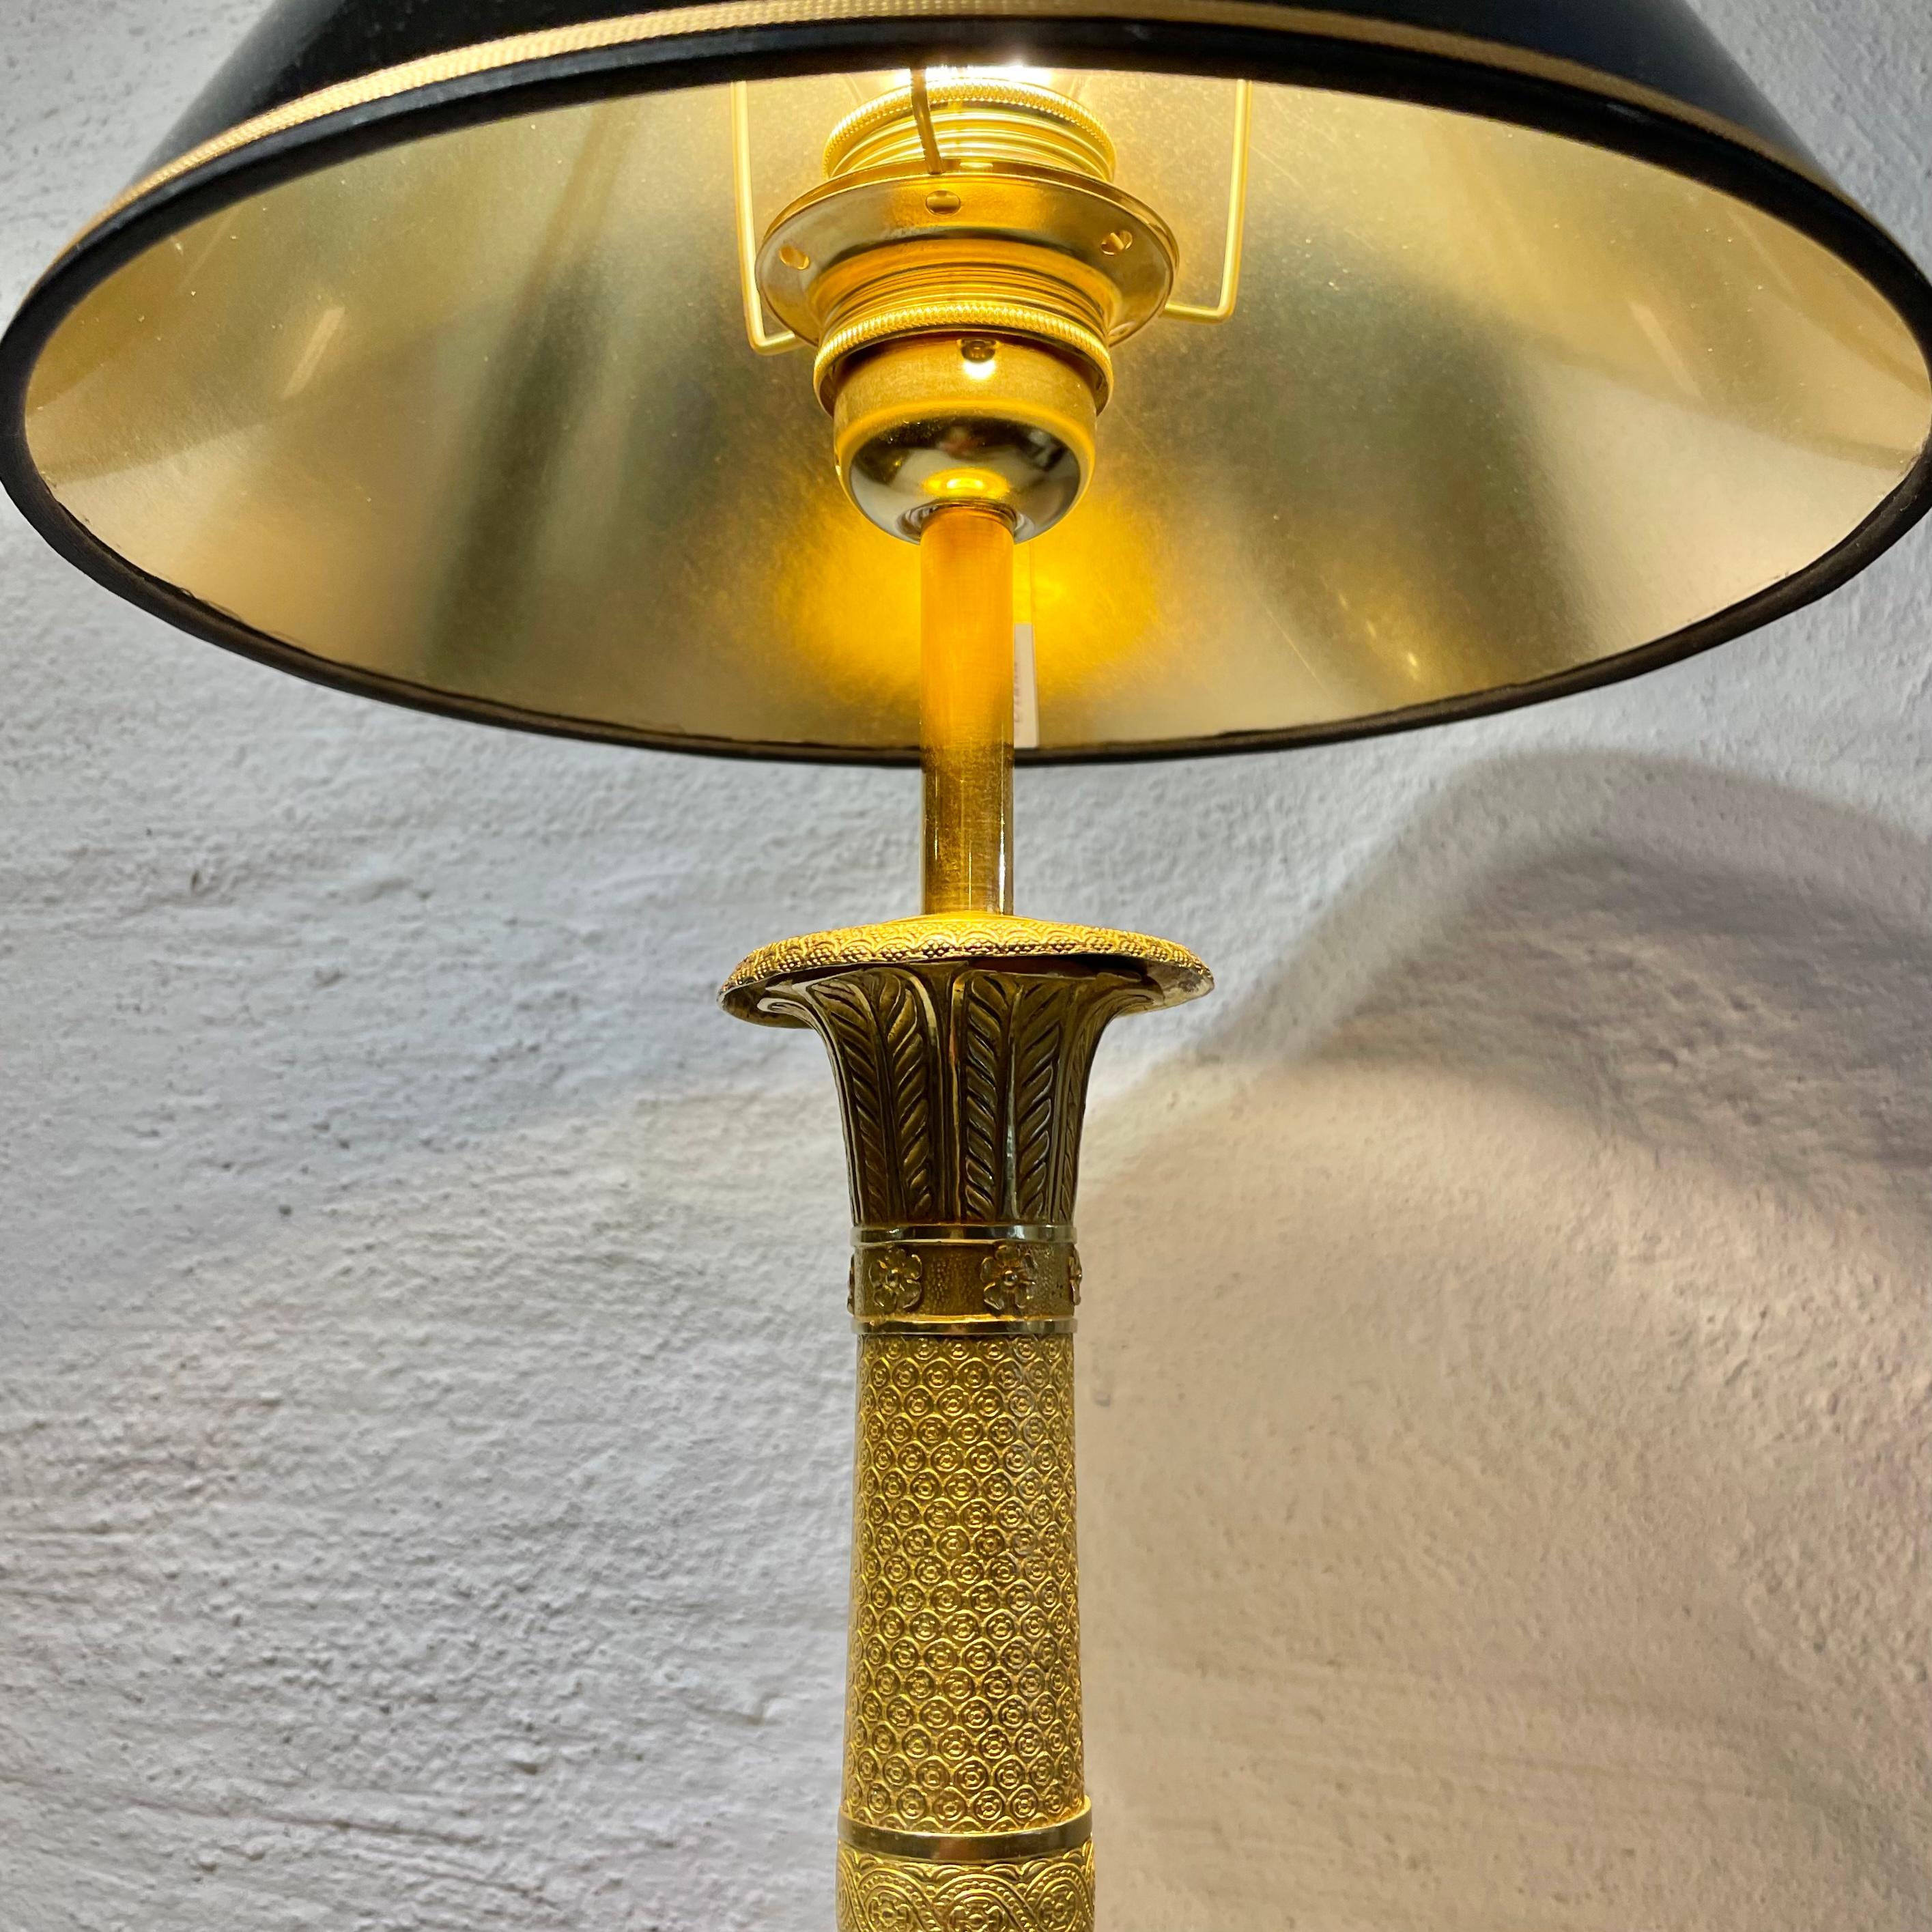 Early 19th Century Table Lamp in Gilded Bronze, Originally an Empire Candlestick from the 1820s